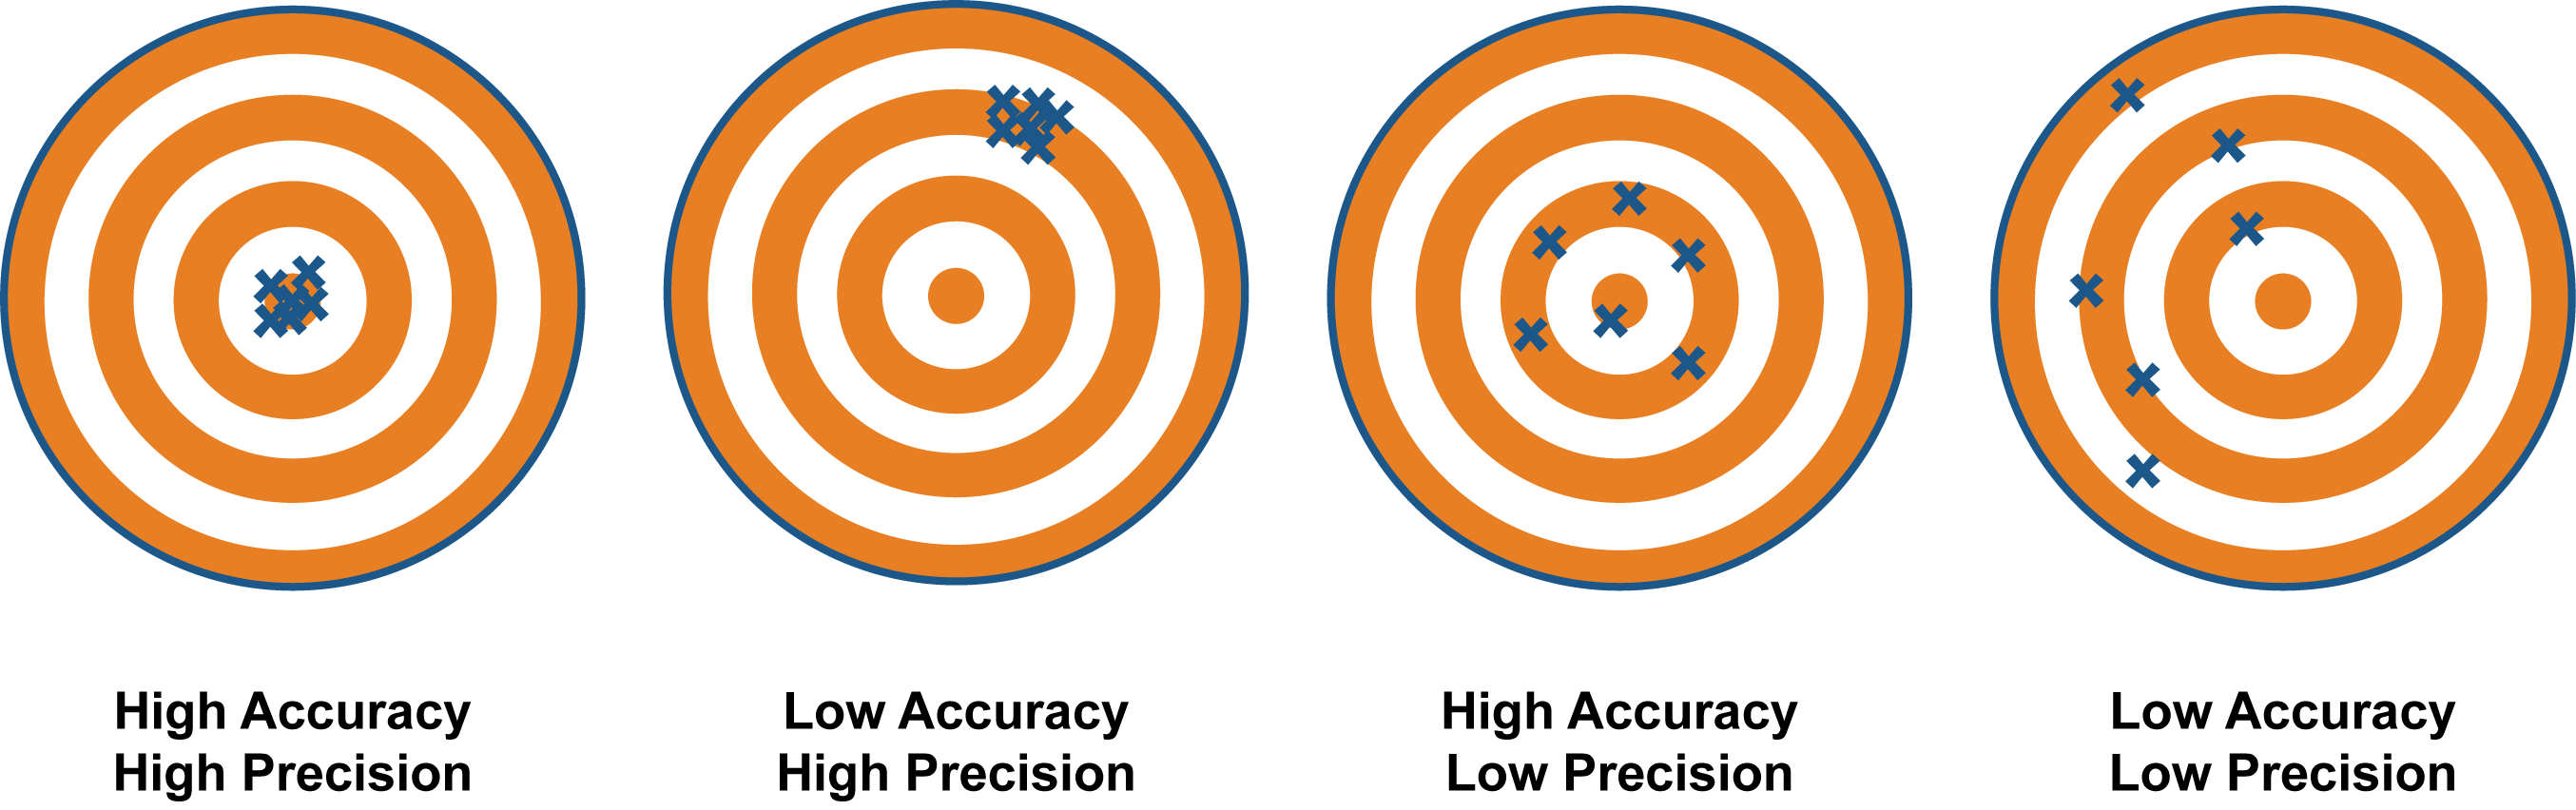 accuracy_percision